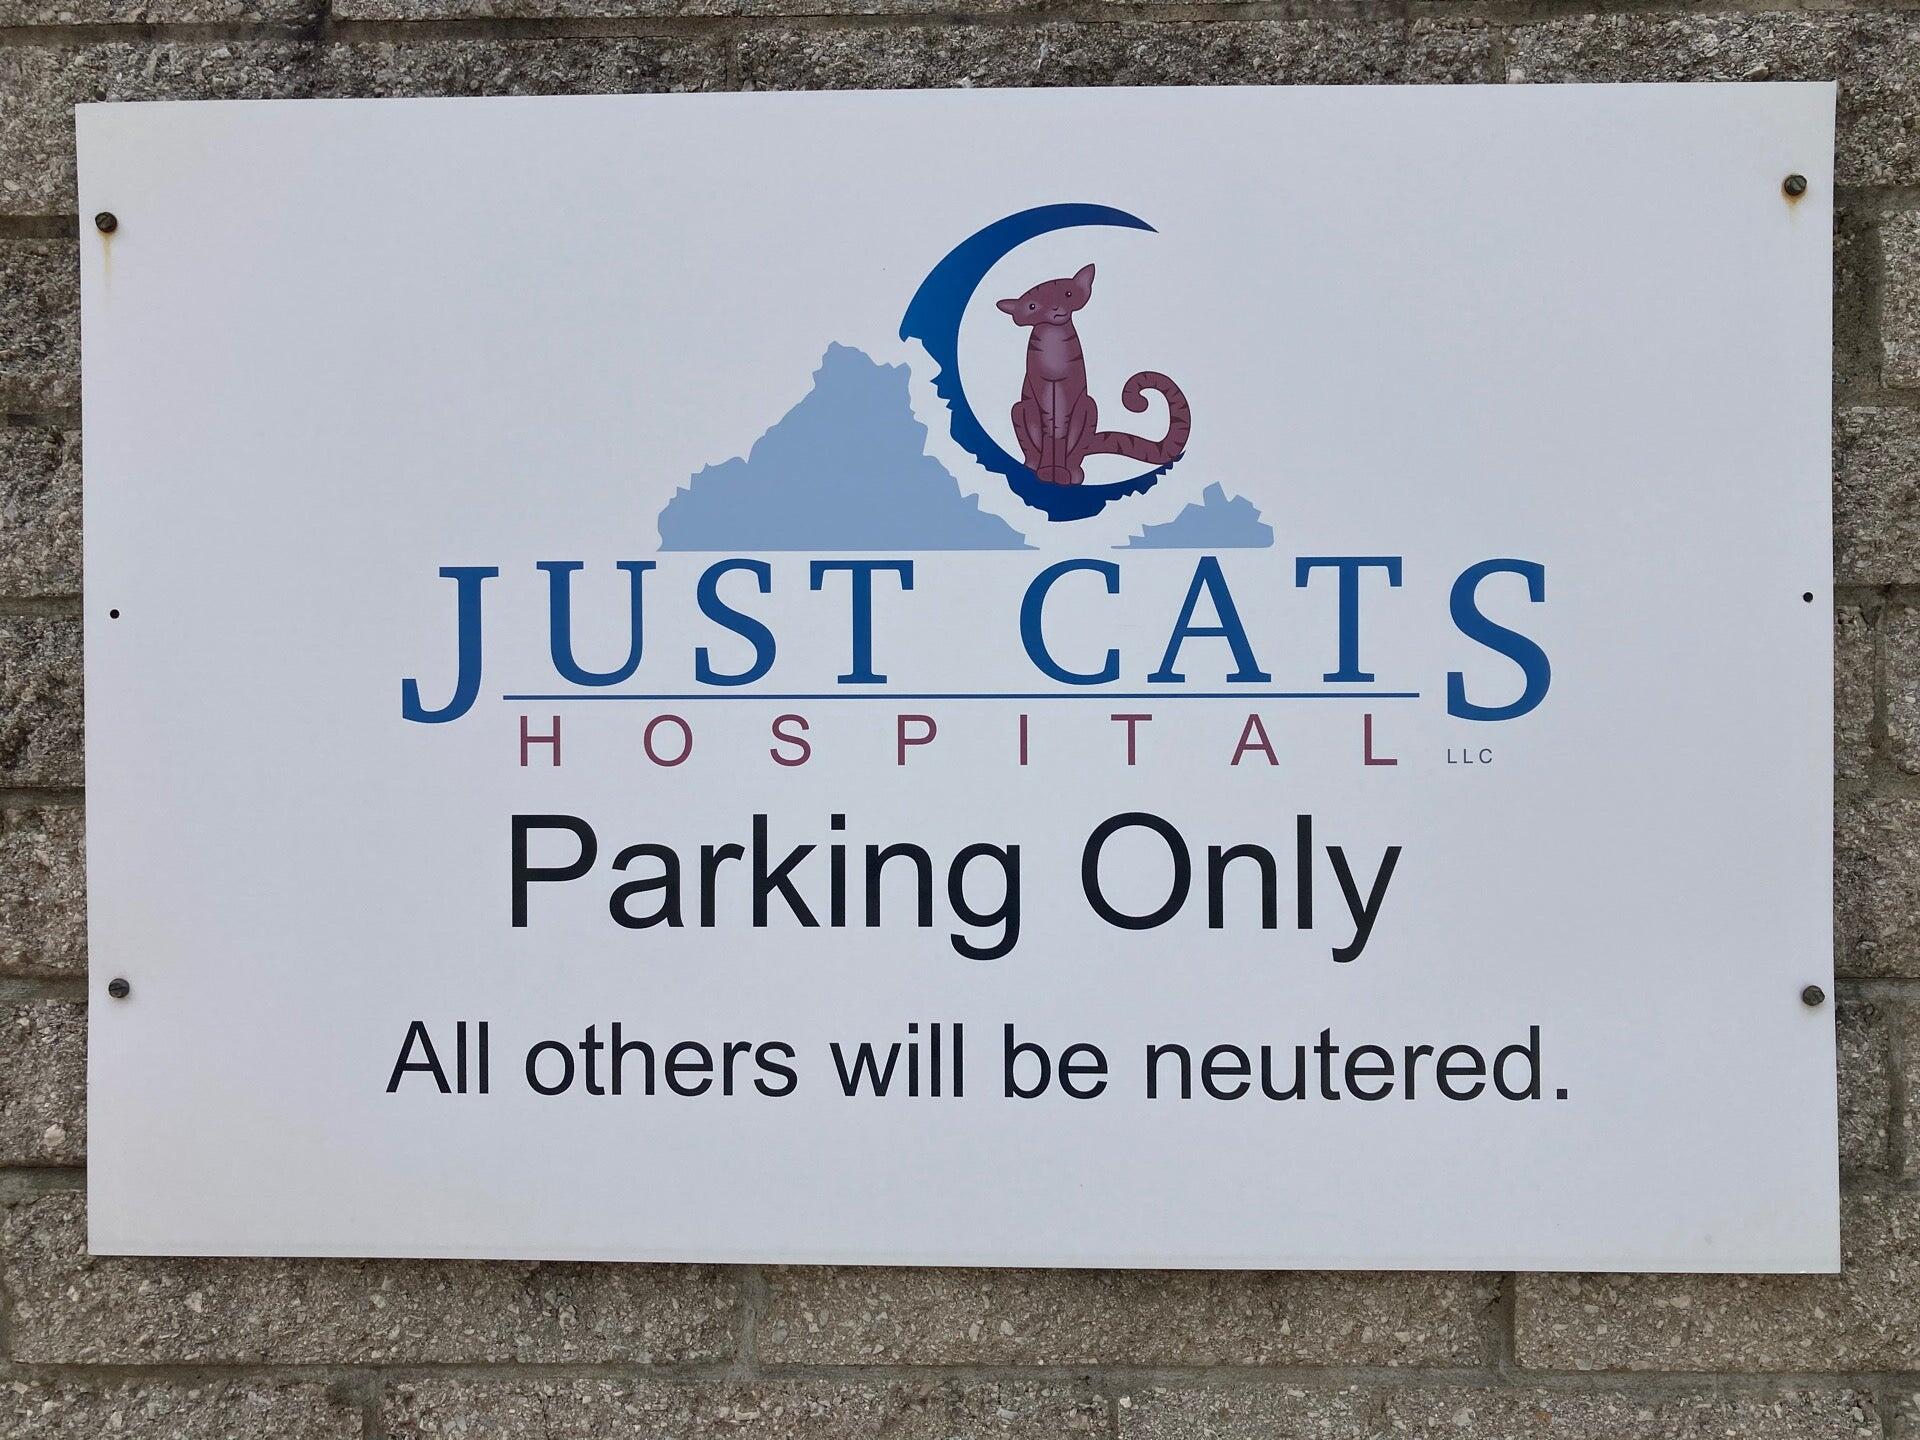 Just Cats Hospital 4125 Mayfield Rd, South Euclid Ohio 44121